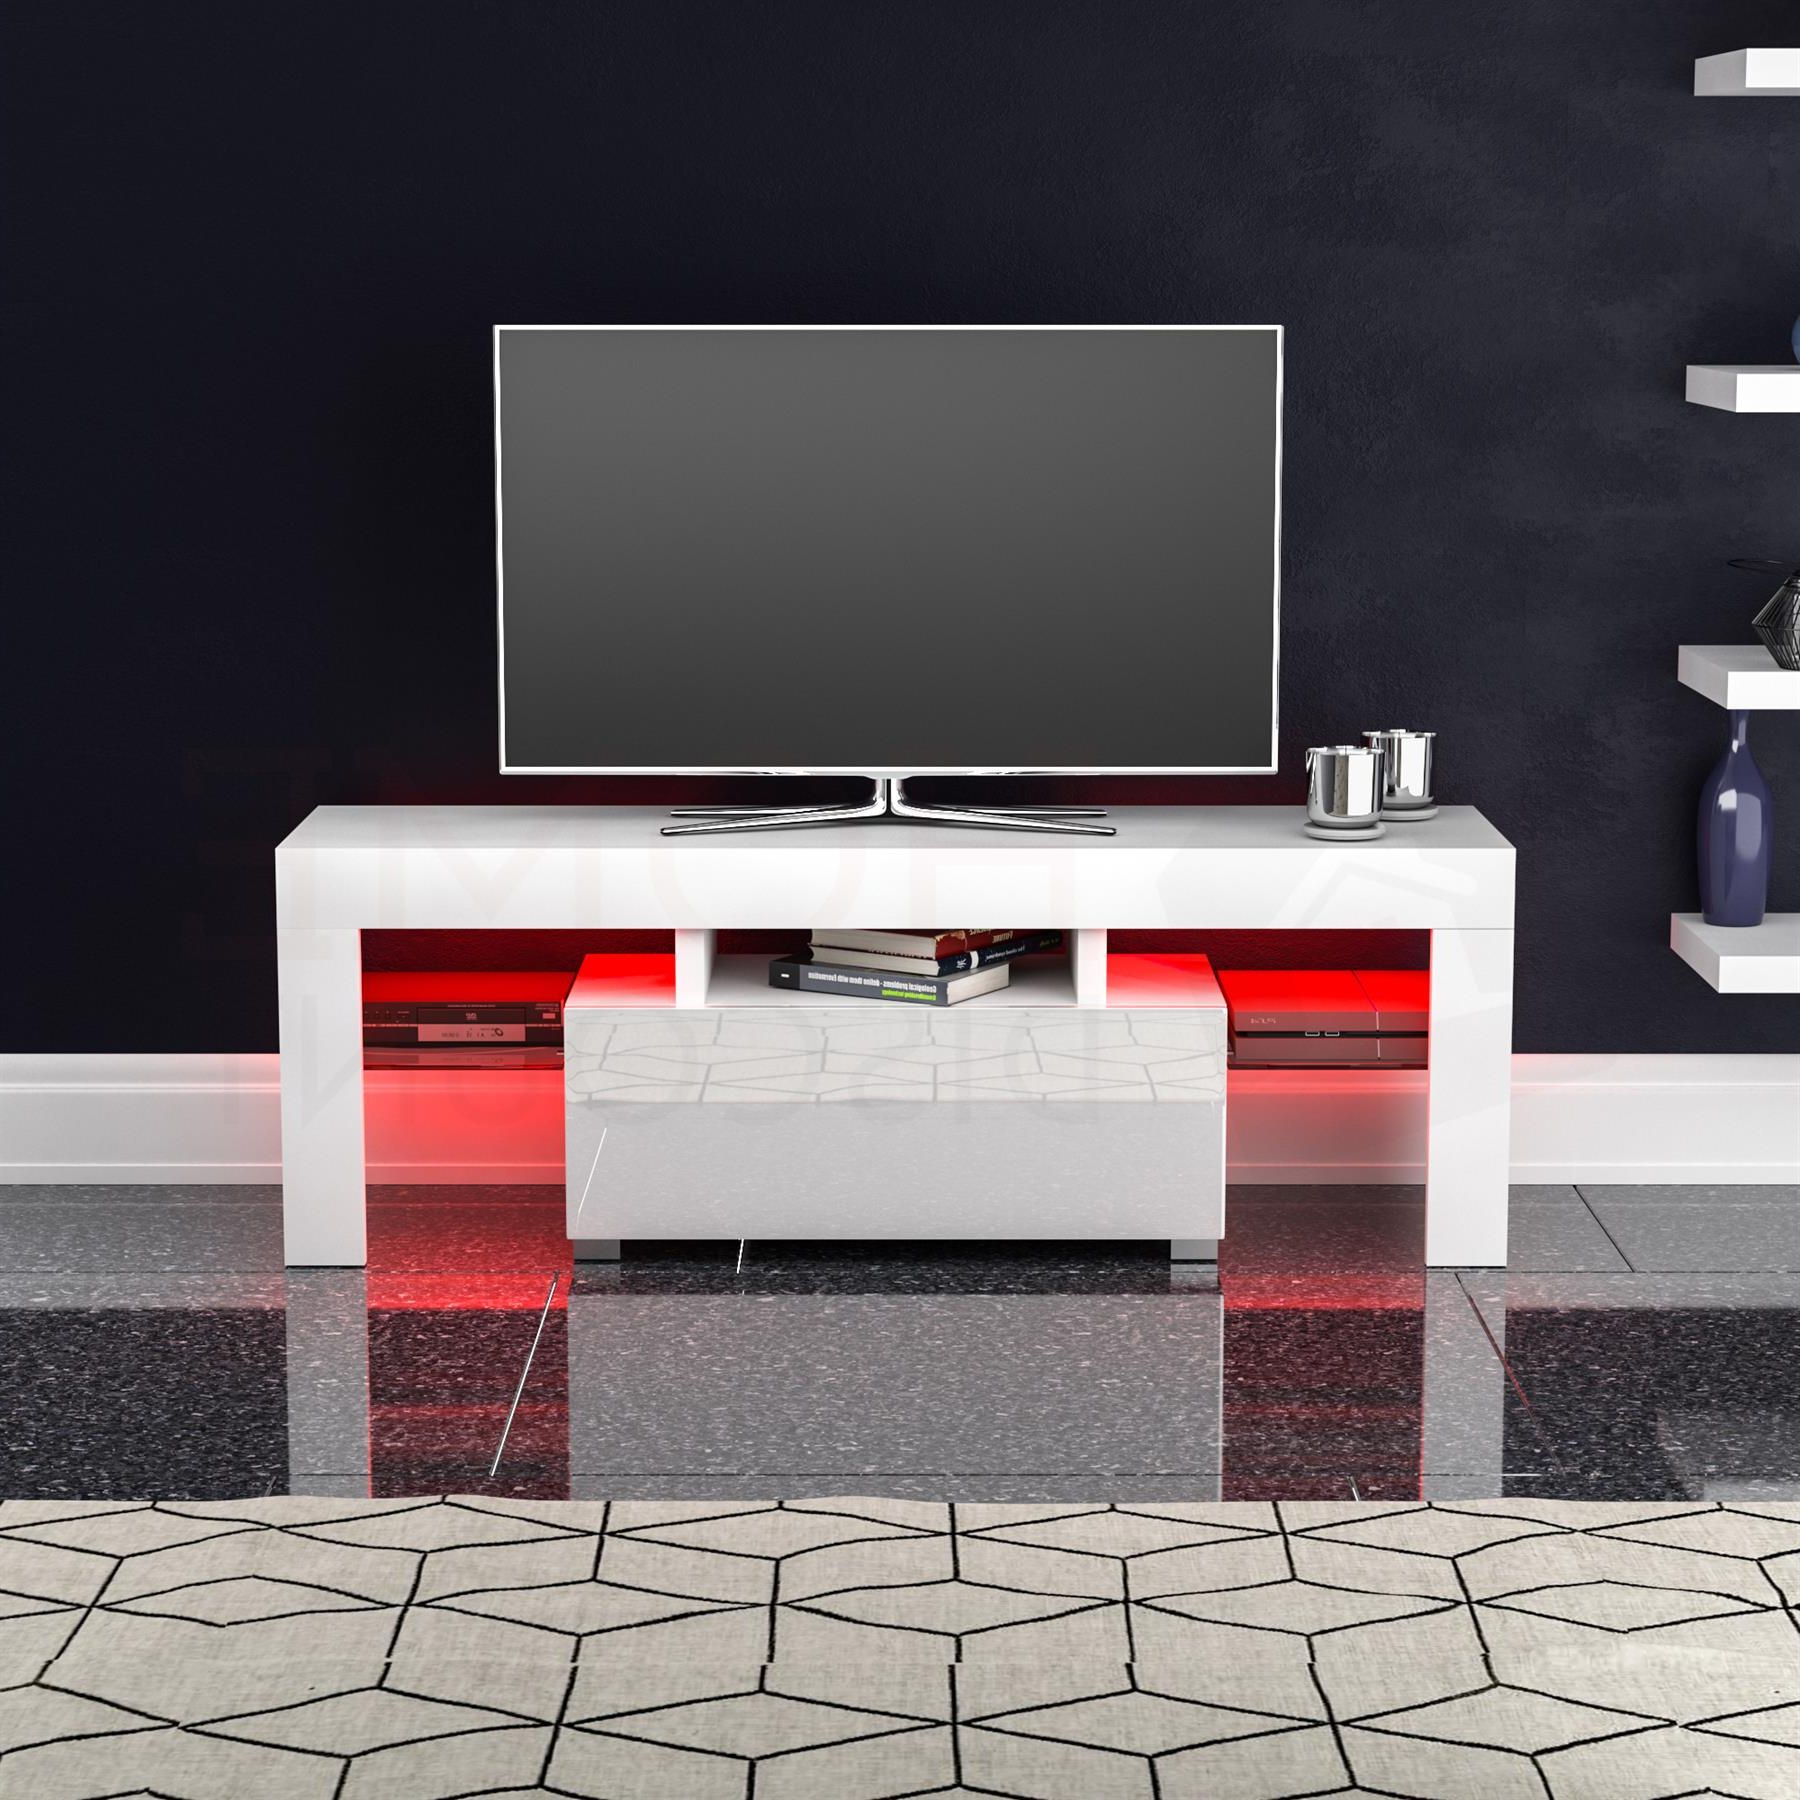 Luna Led Tv Stand Cabinet Unit 1 Drawer Modern Throughout Zimtown Modern Tv Stands High Gloss Media Console Cabinet With Led Shelf And Drawers (View 10 of 20)